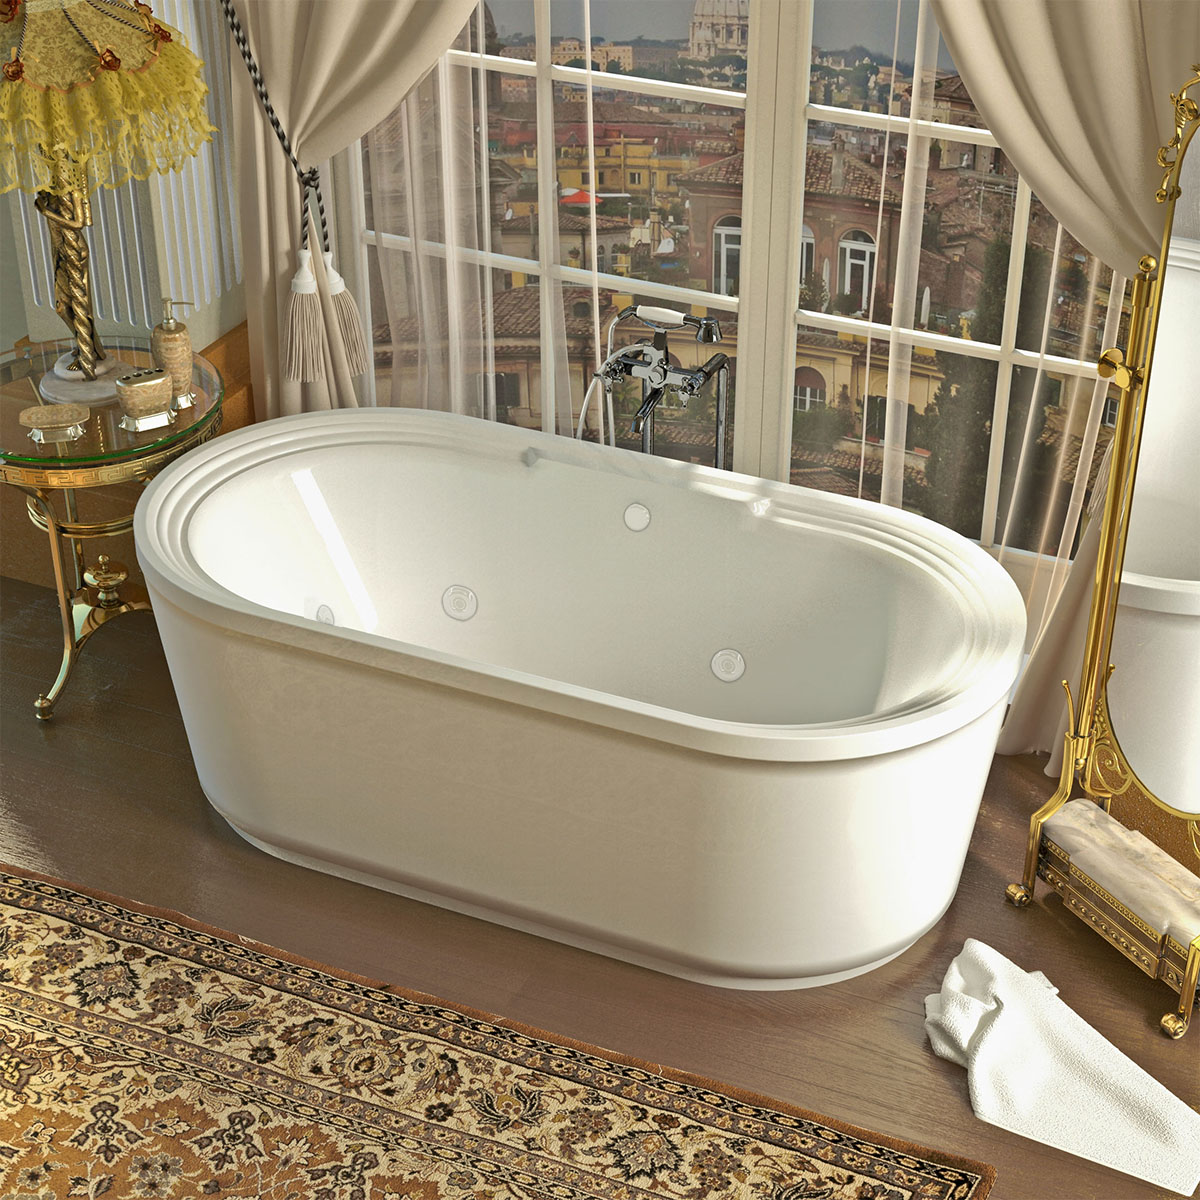 Padre 34 x 67 x 21 in. Oval Freestanding Whirlpool Jetted Bathtub